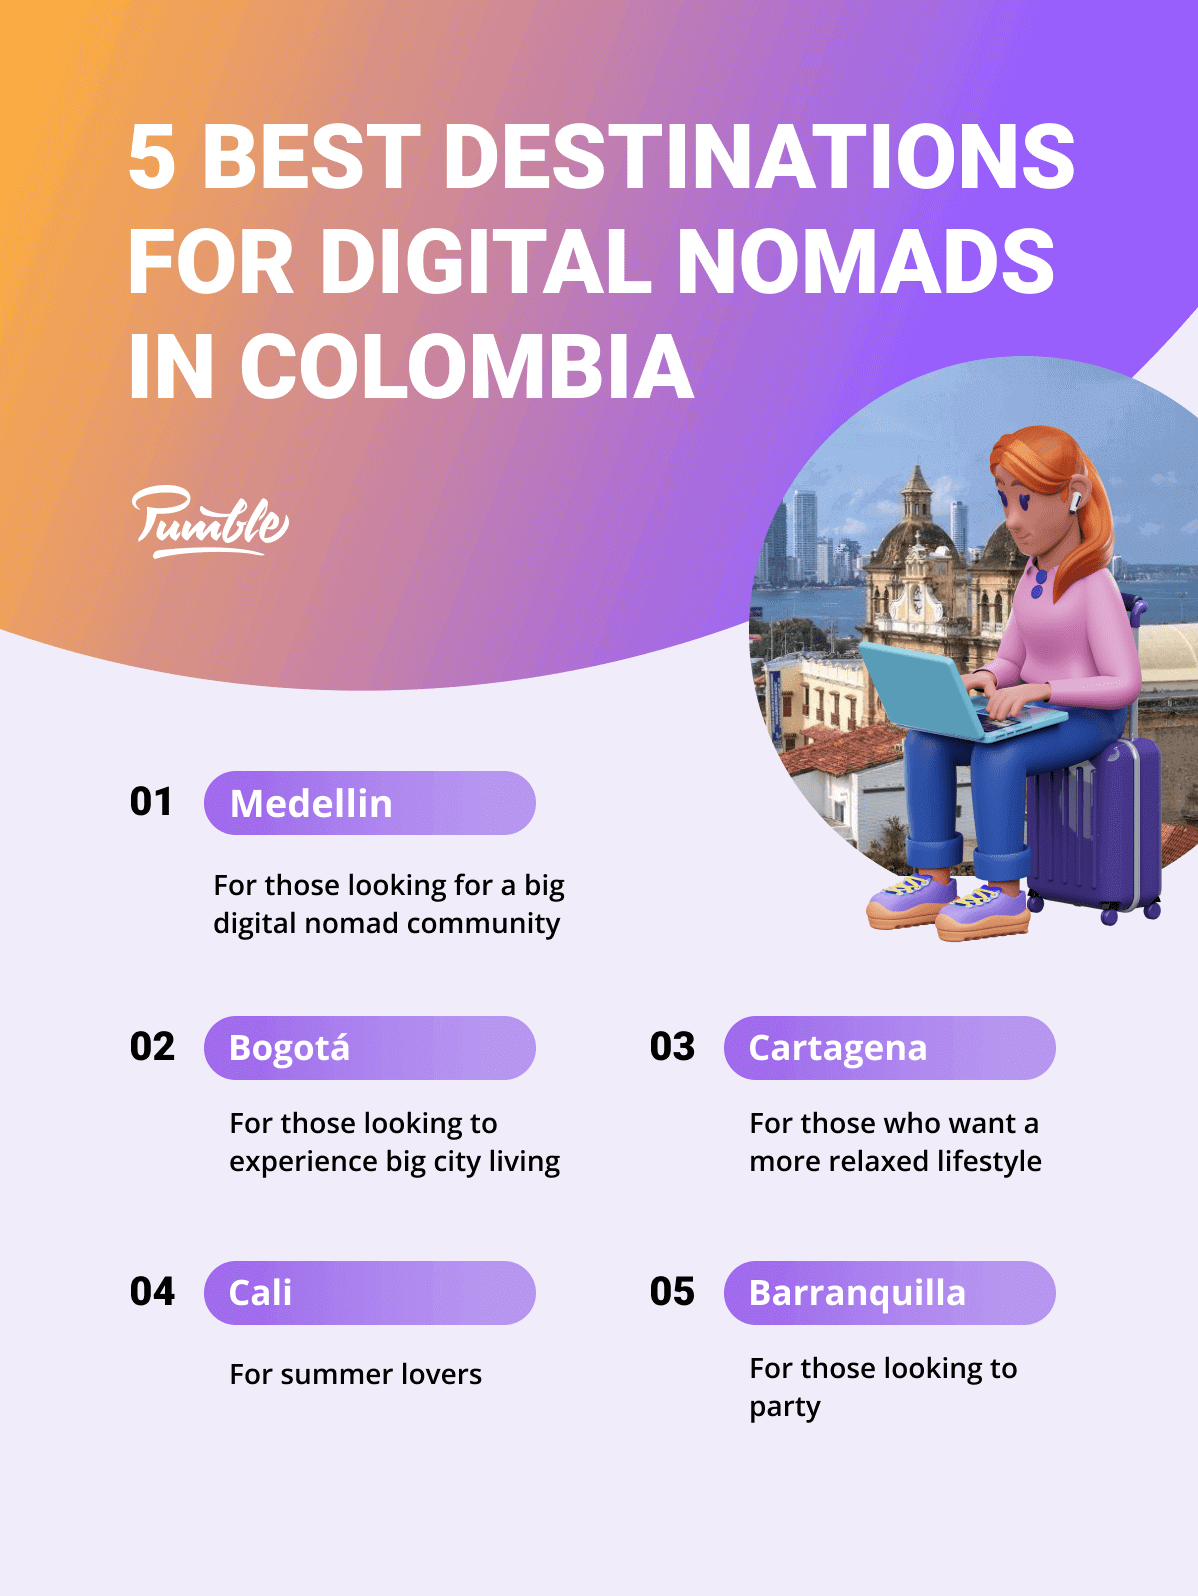 5 Best destinations for digital nomads in Colombia